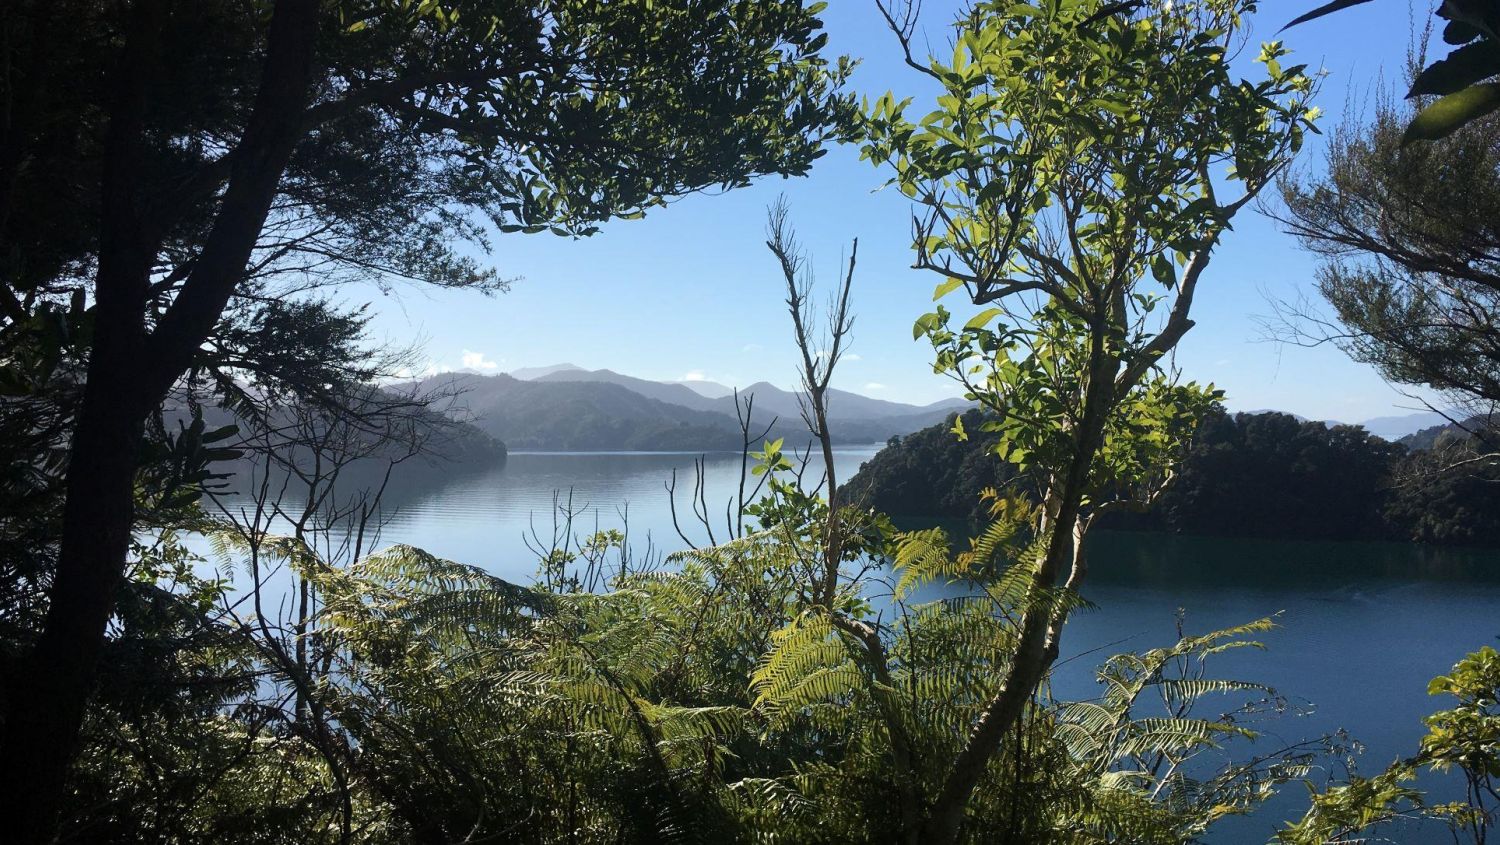 Queen Charlotte Track views